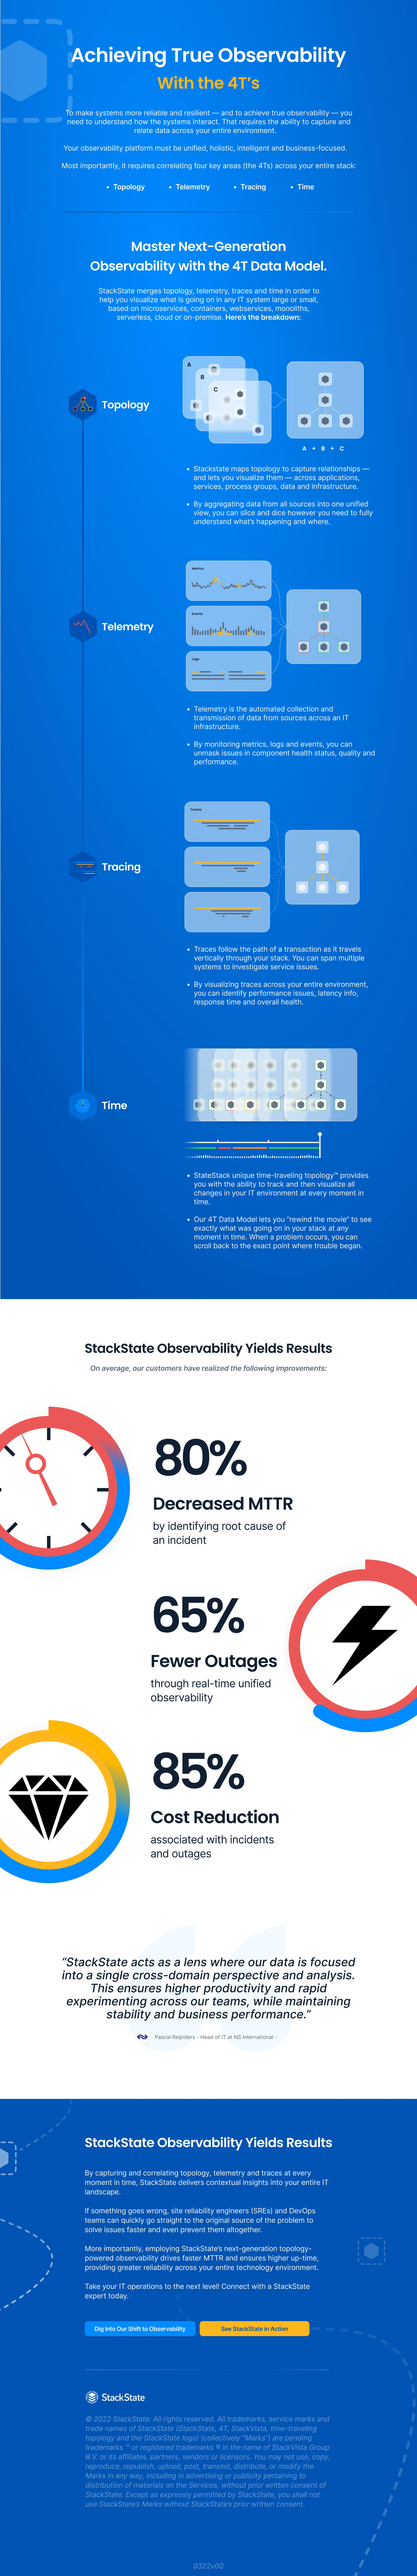 Achieving True Observability | Infographic